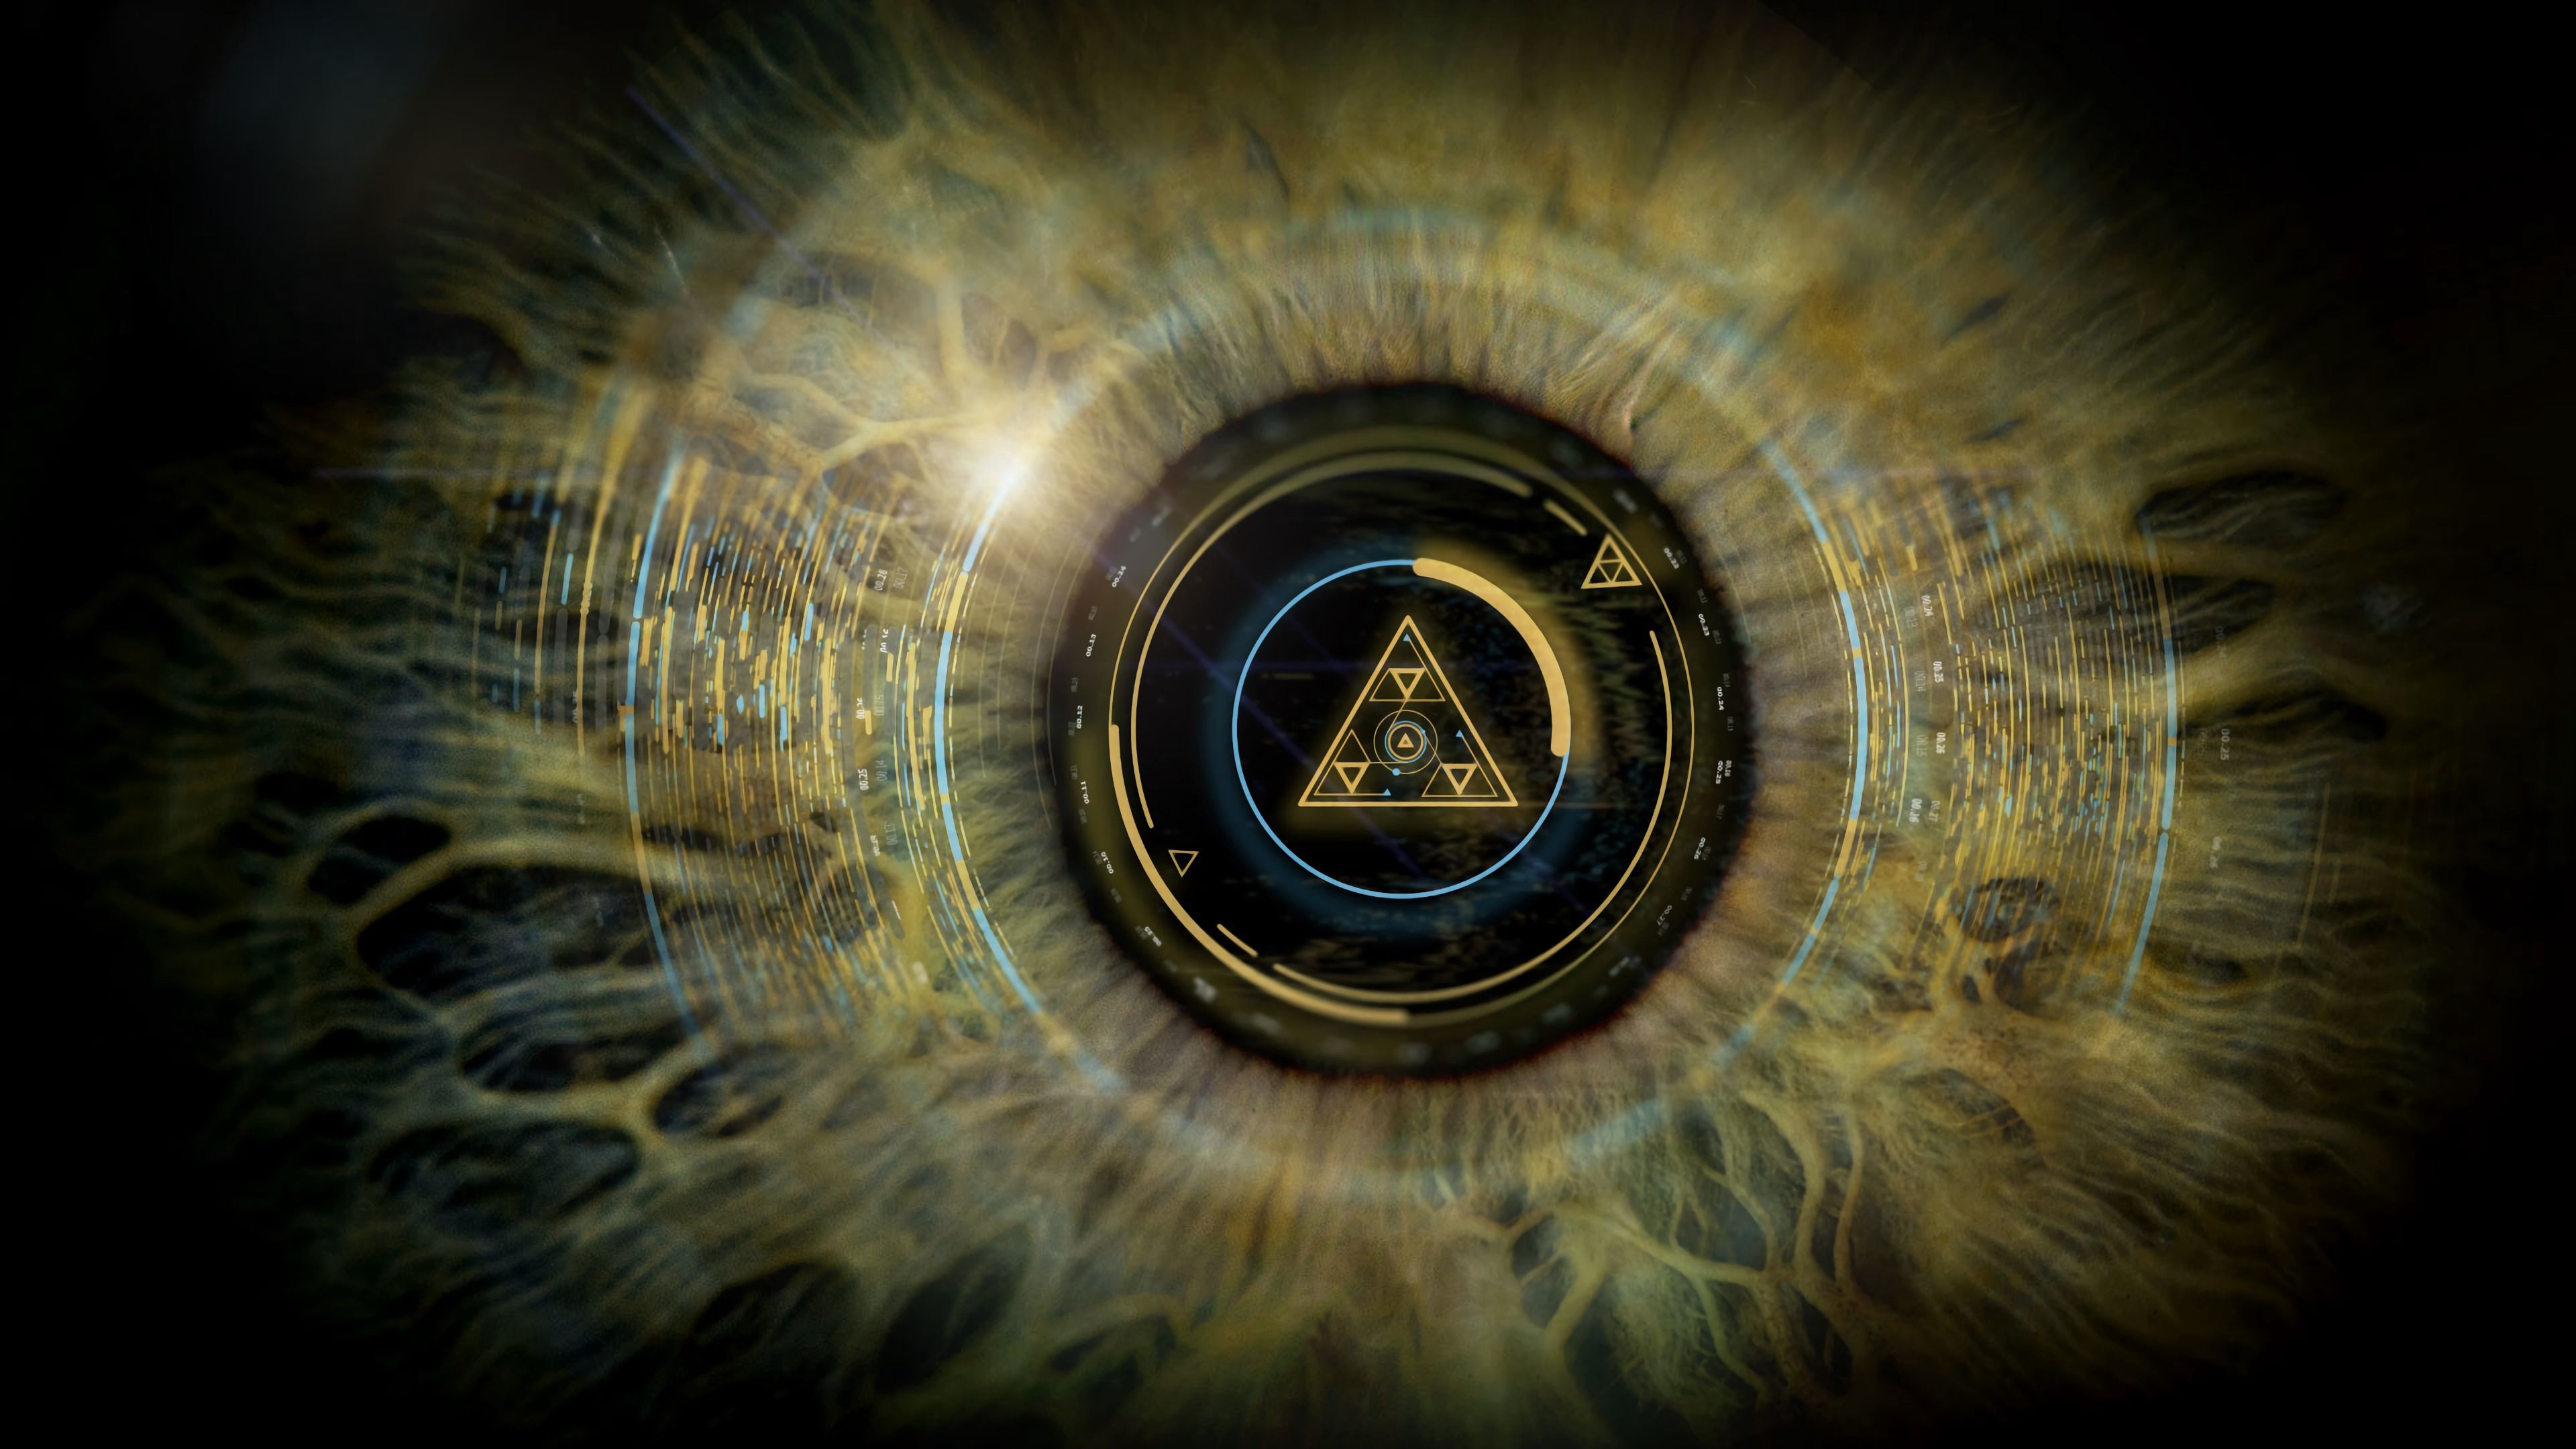 triangle, scheme, pupil, abstract, elements, eye wallpaper for mobile